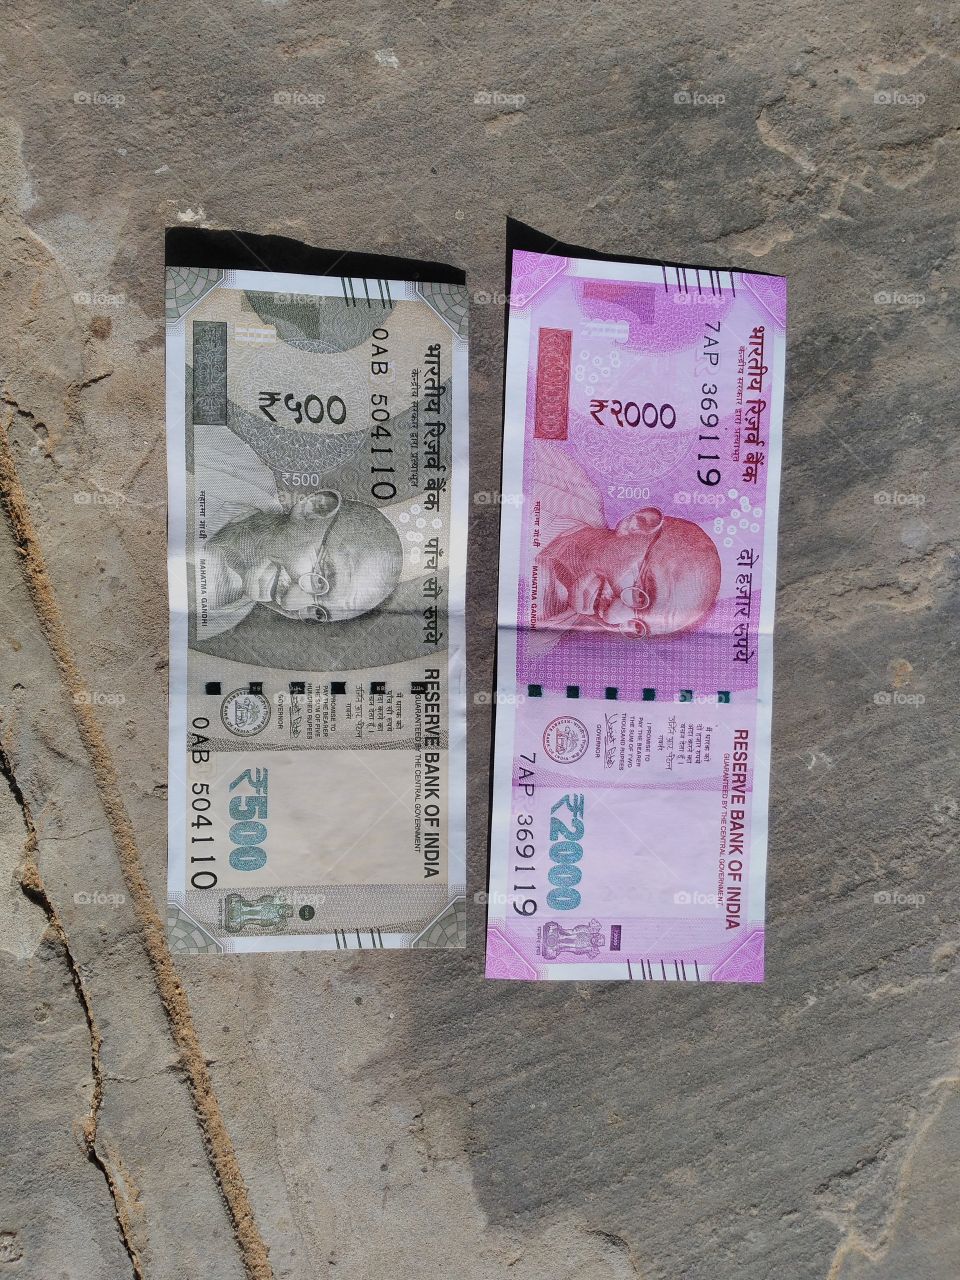 Elevated view of new Indian currency